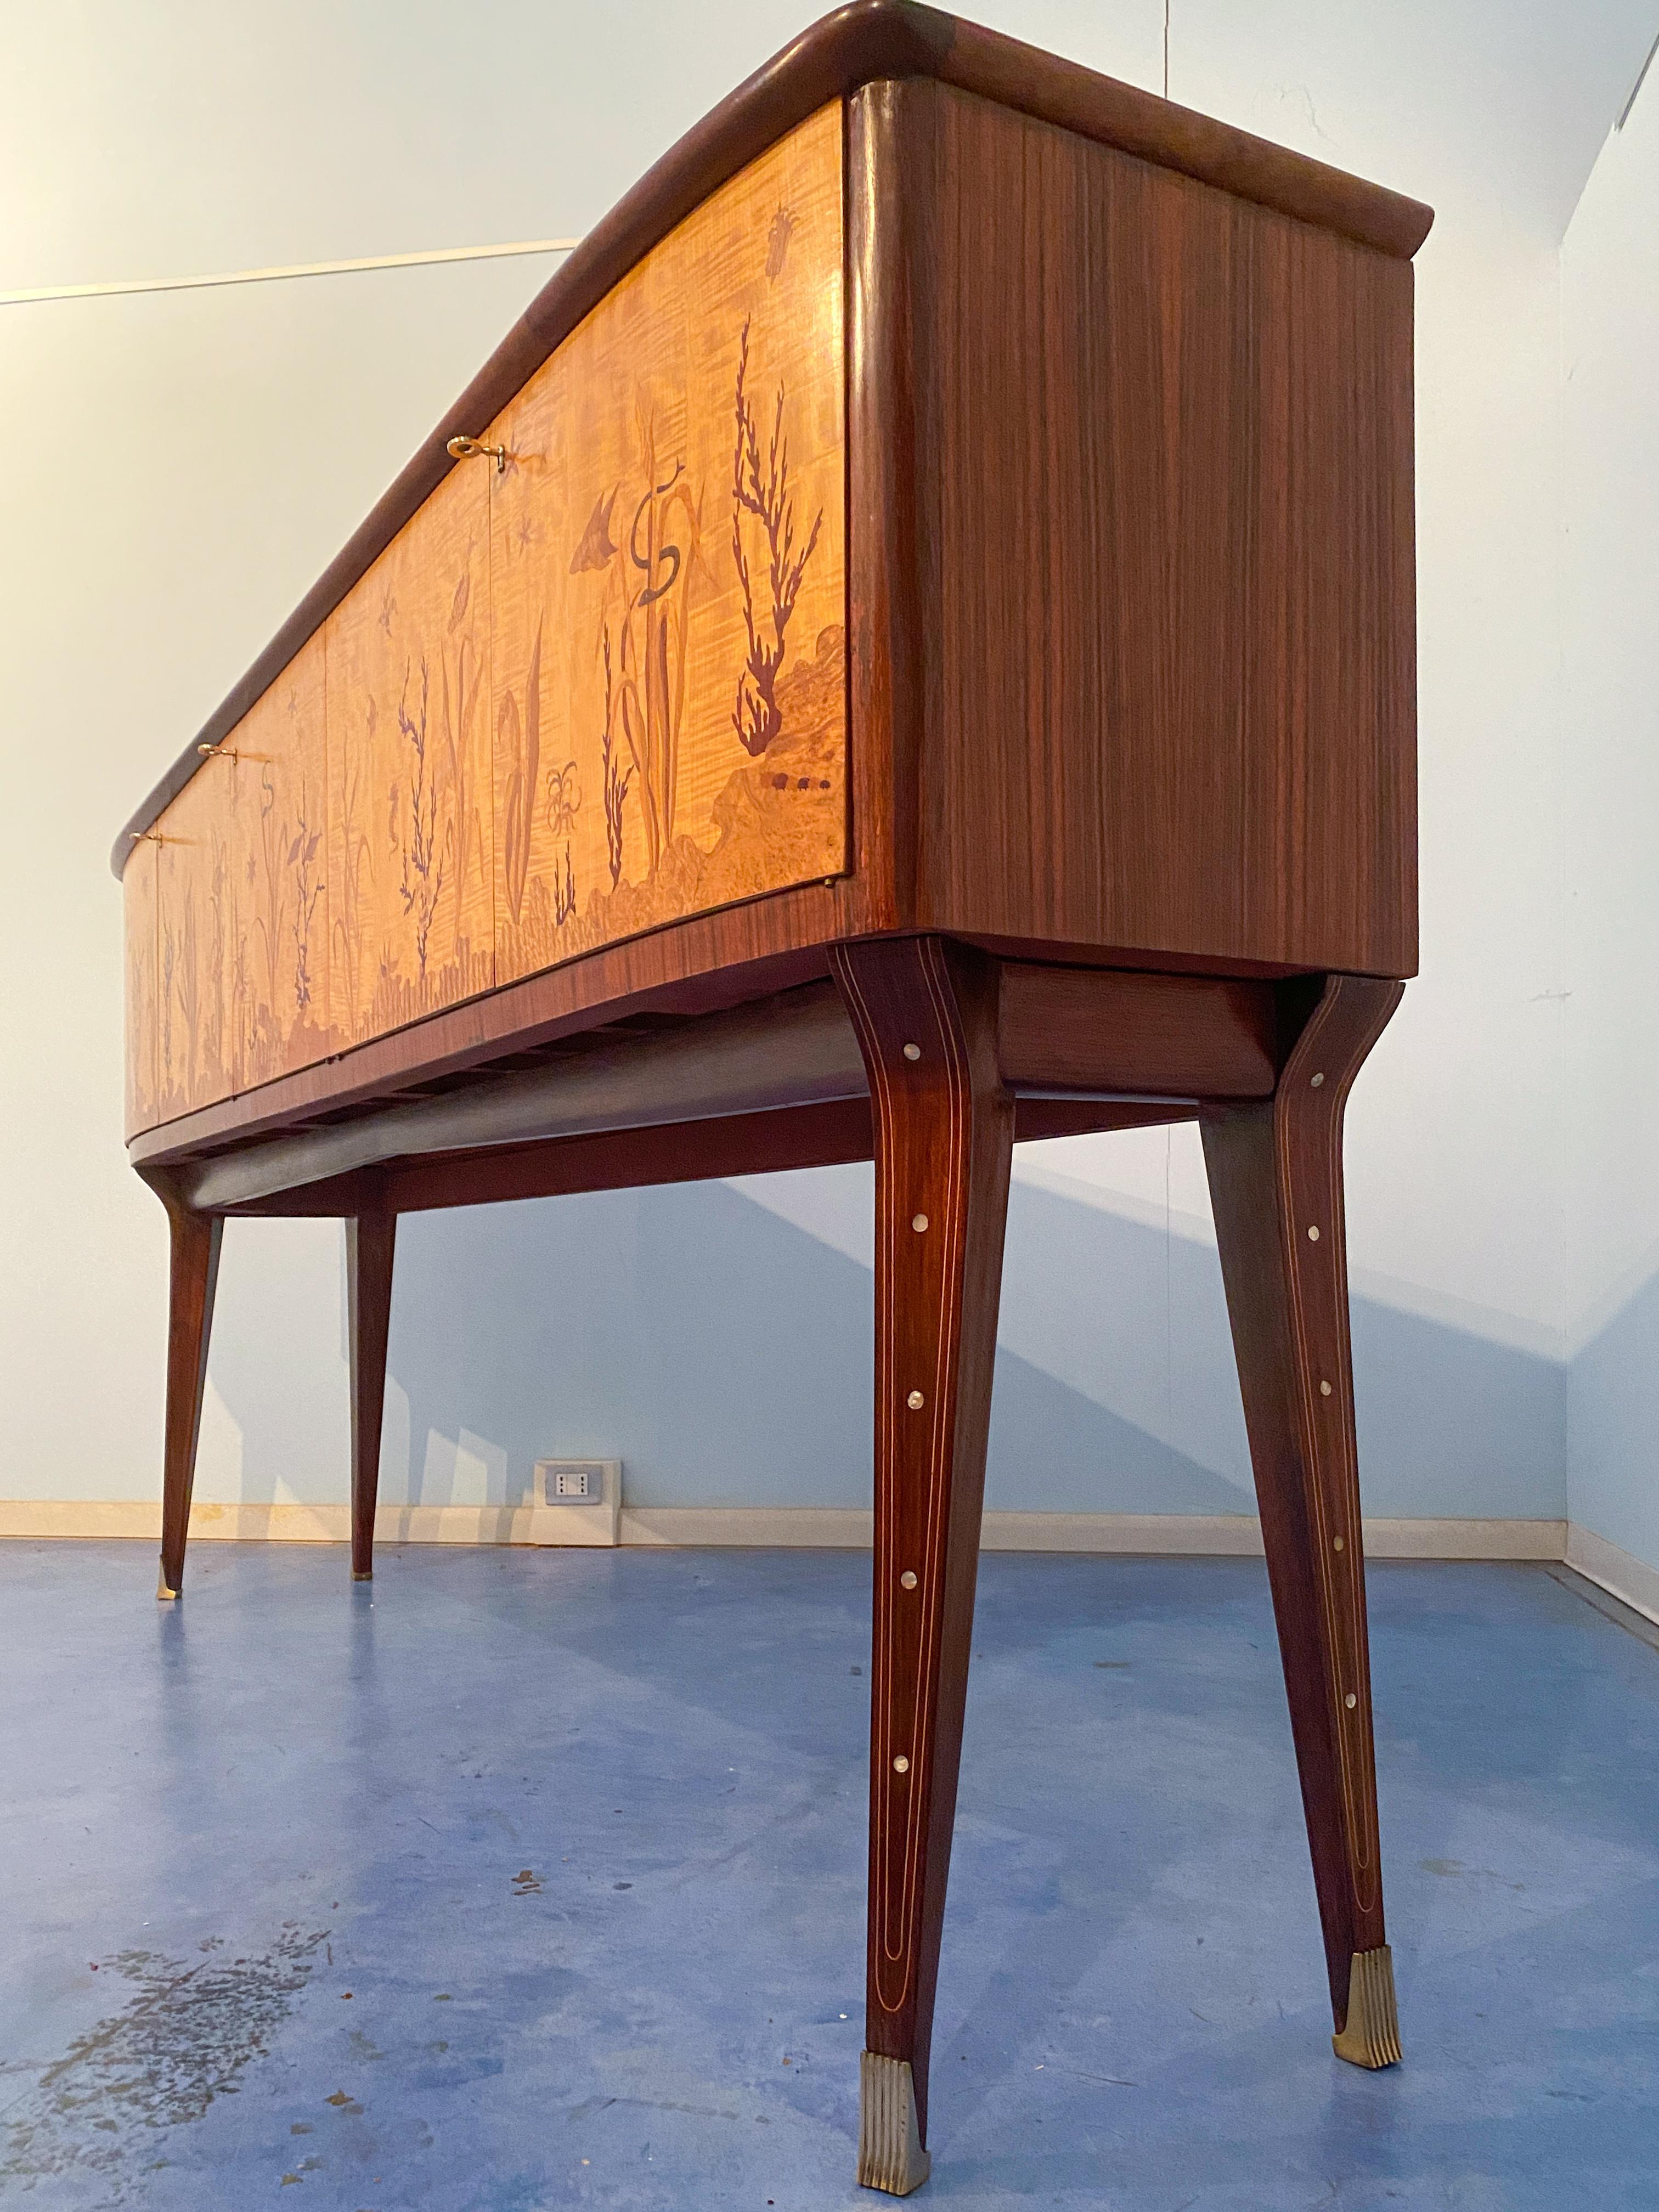 Italian Midcentury Inlaid Maple Sideboard by Andrea Gusmai, 1950s In Good Condition For Sale In Traversetolo, IT